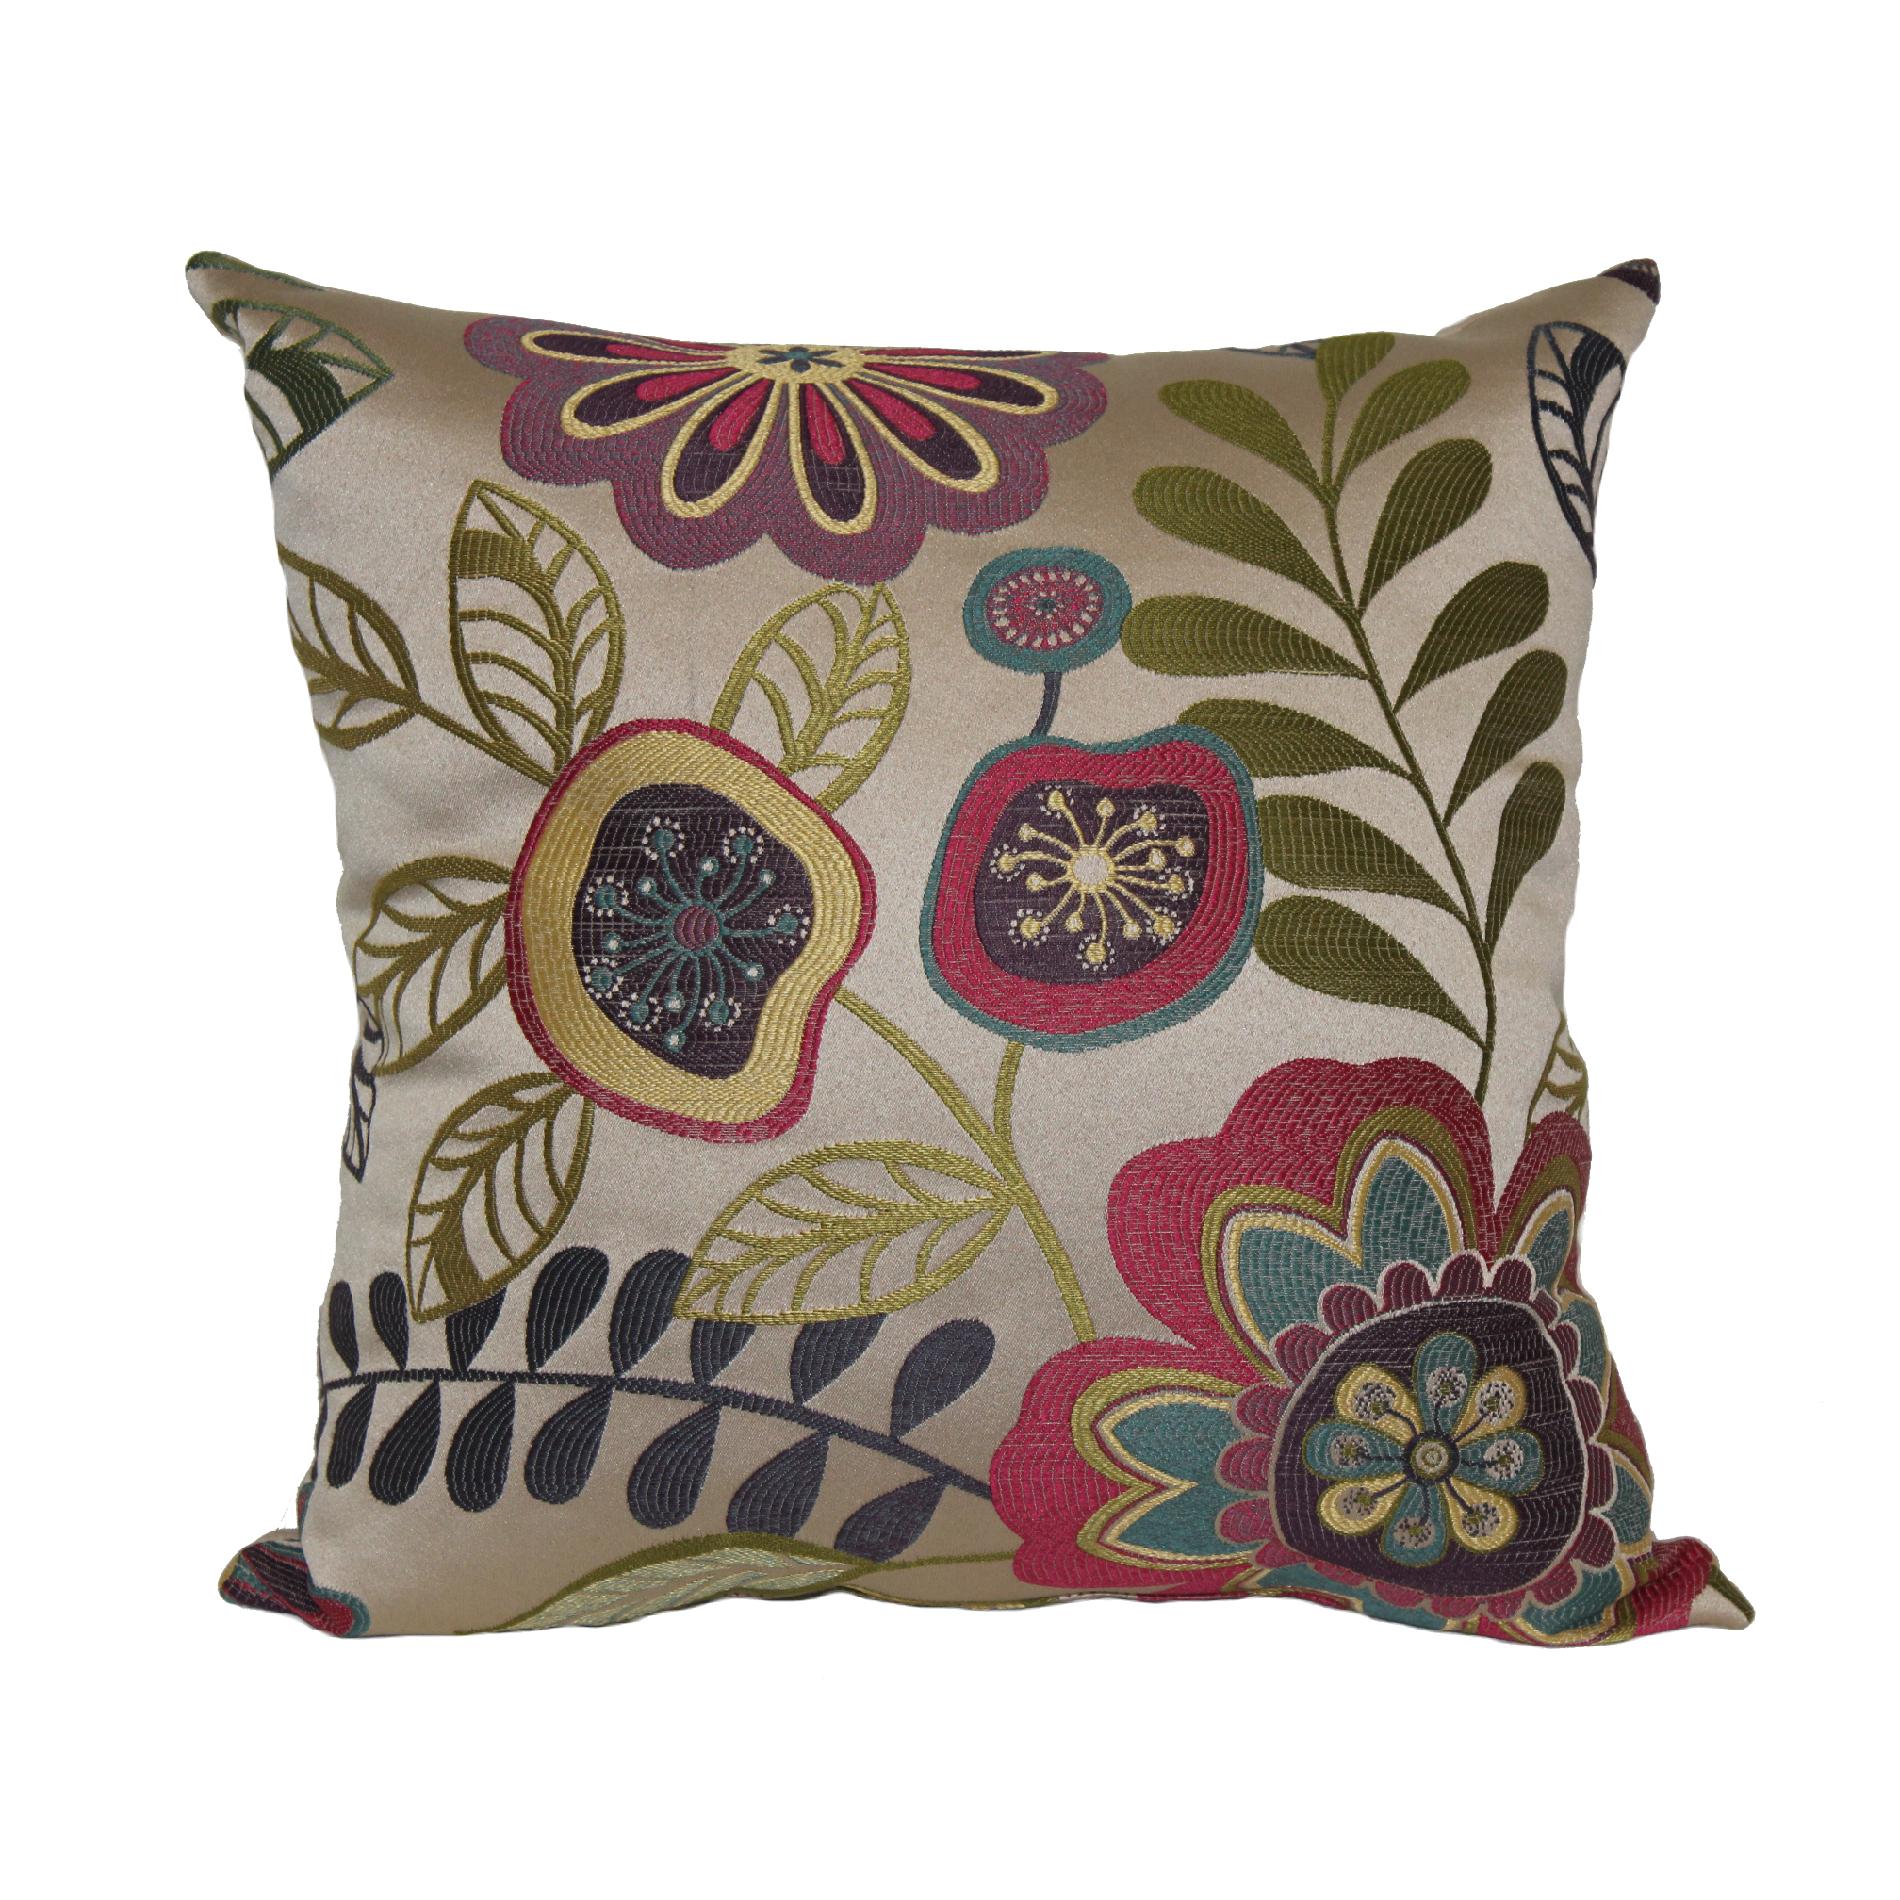 Marcy Floral Pillow - Berry